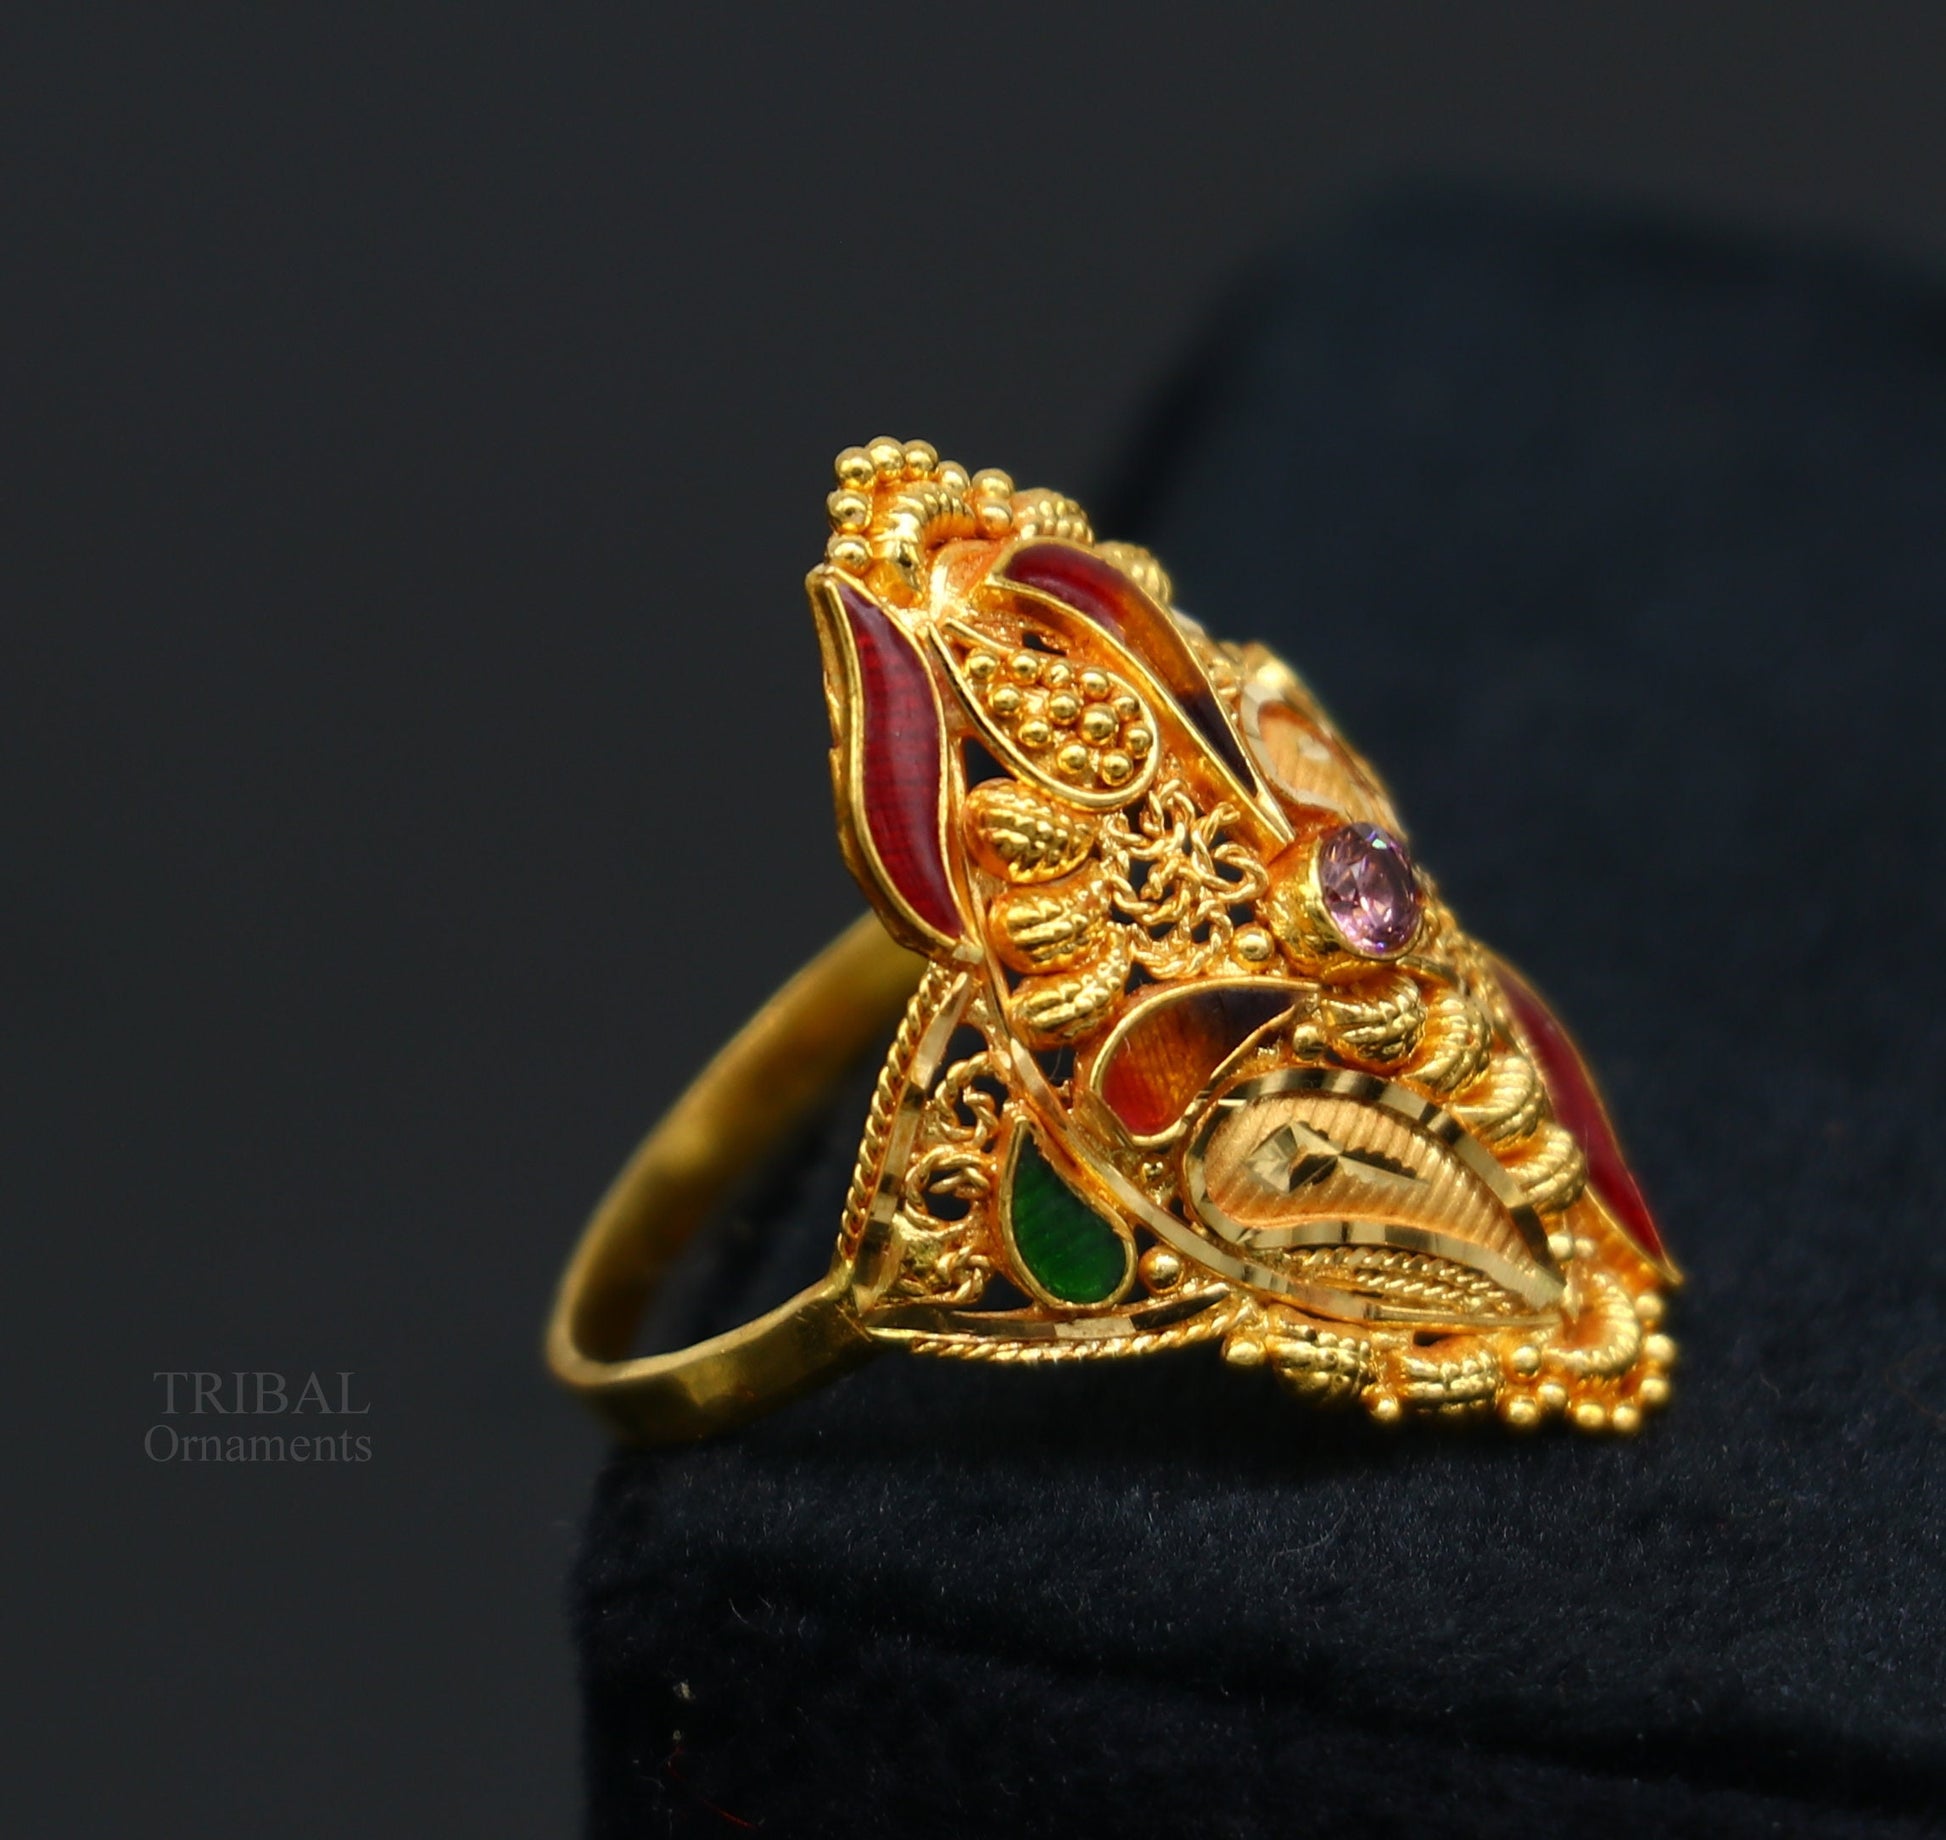 22karat yellow gold handmade ring fabulous filigree work band unisex ring best gift for women's from rajasthan india ring11 - TRIBAL ORNAMENTS